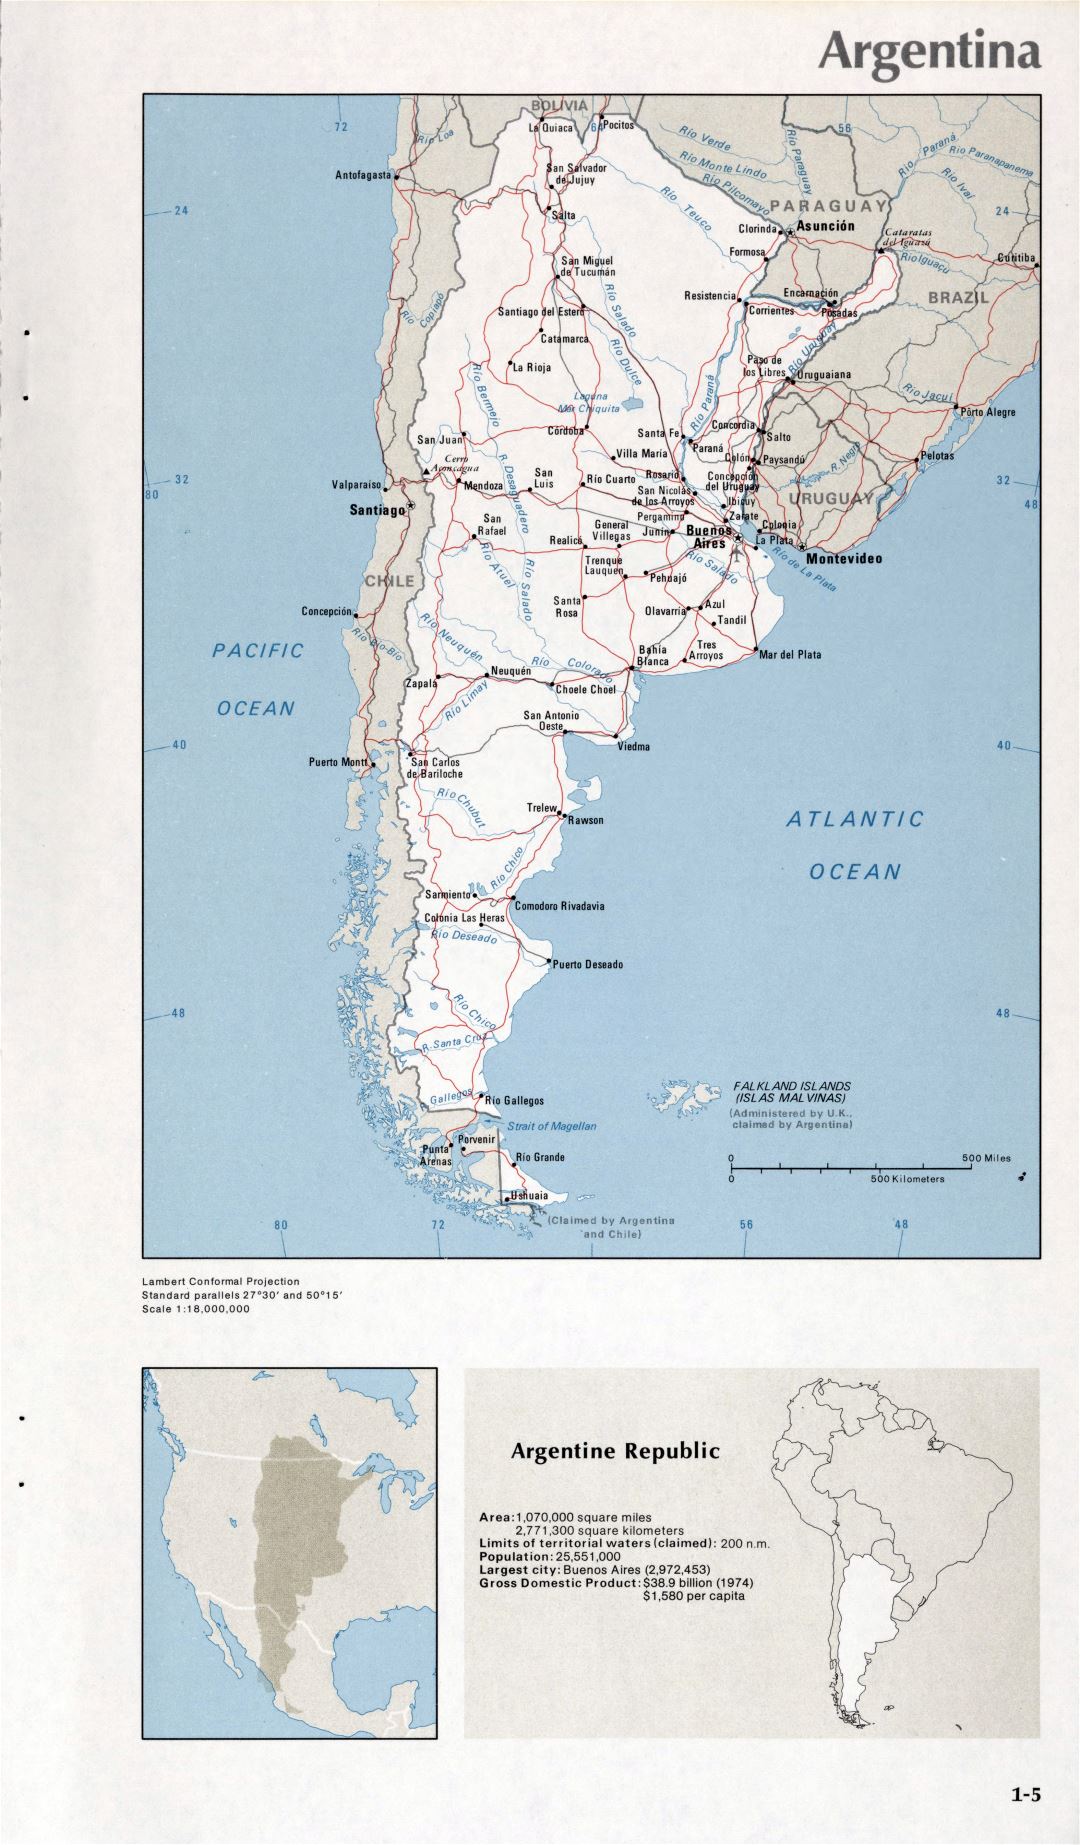 Map of Argentina (1-5)